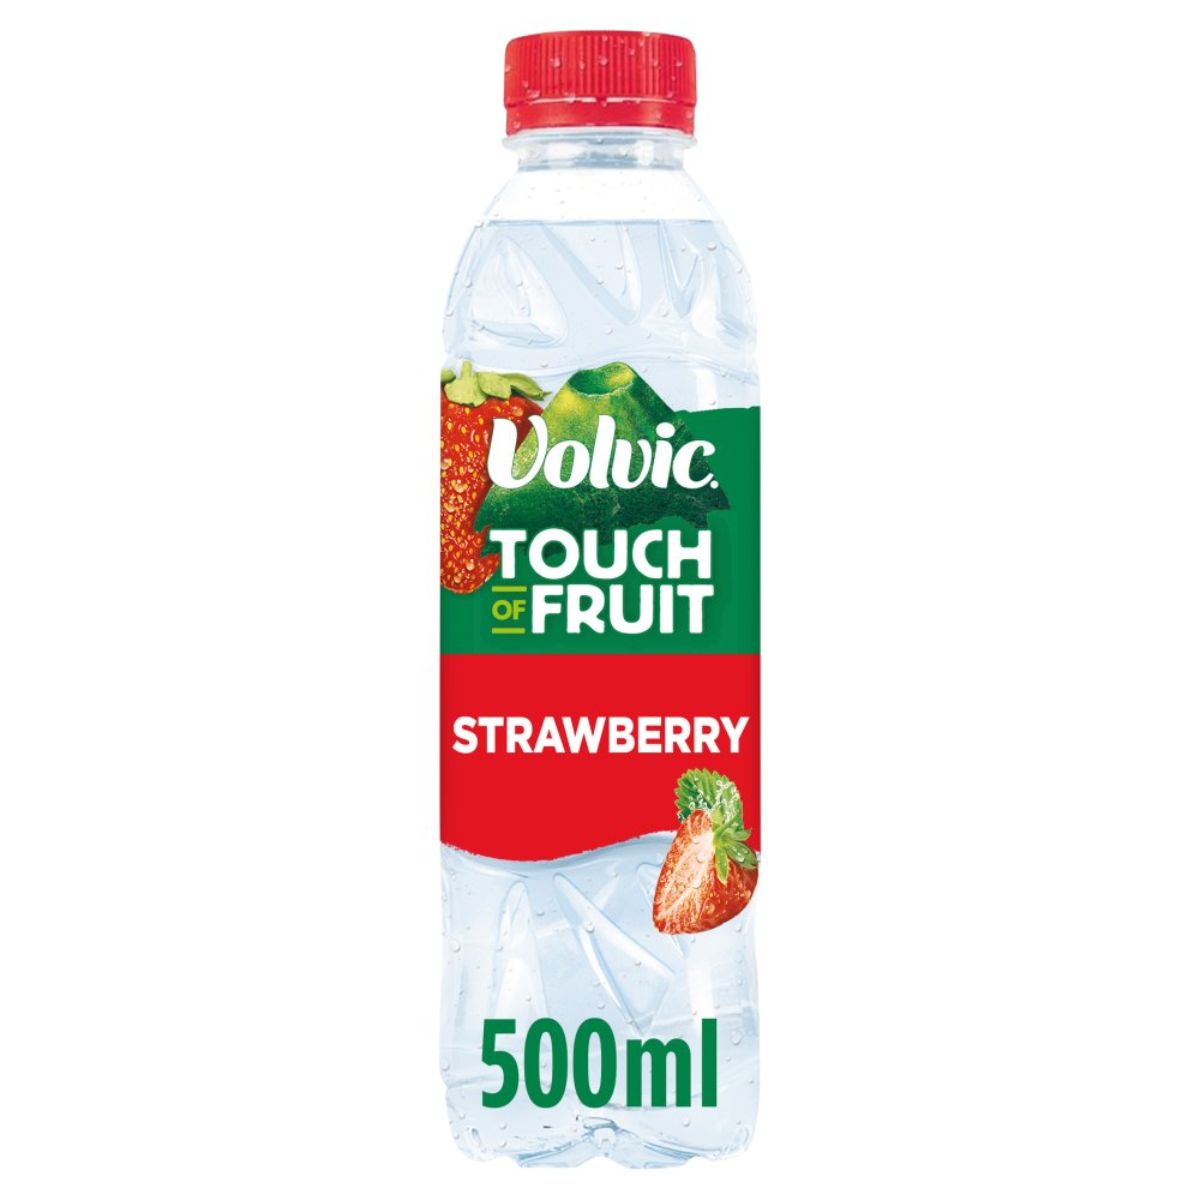 A Volvic - Touch of Fruit Strawberry Flavoured Water - 500ml.